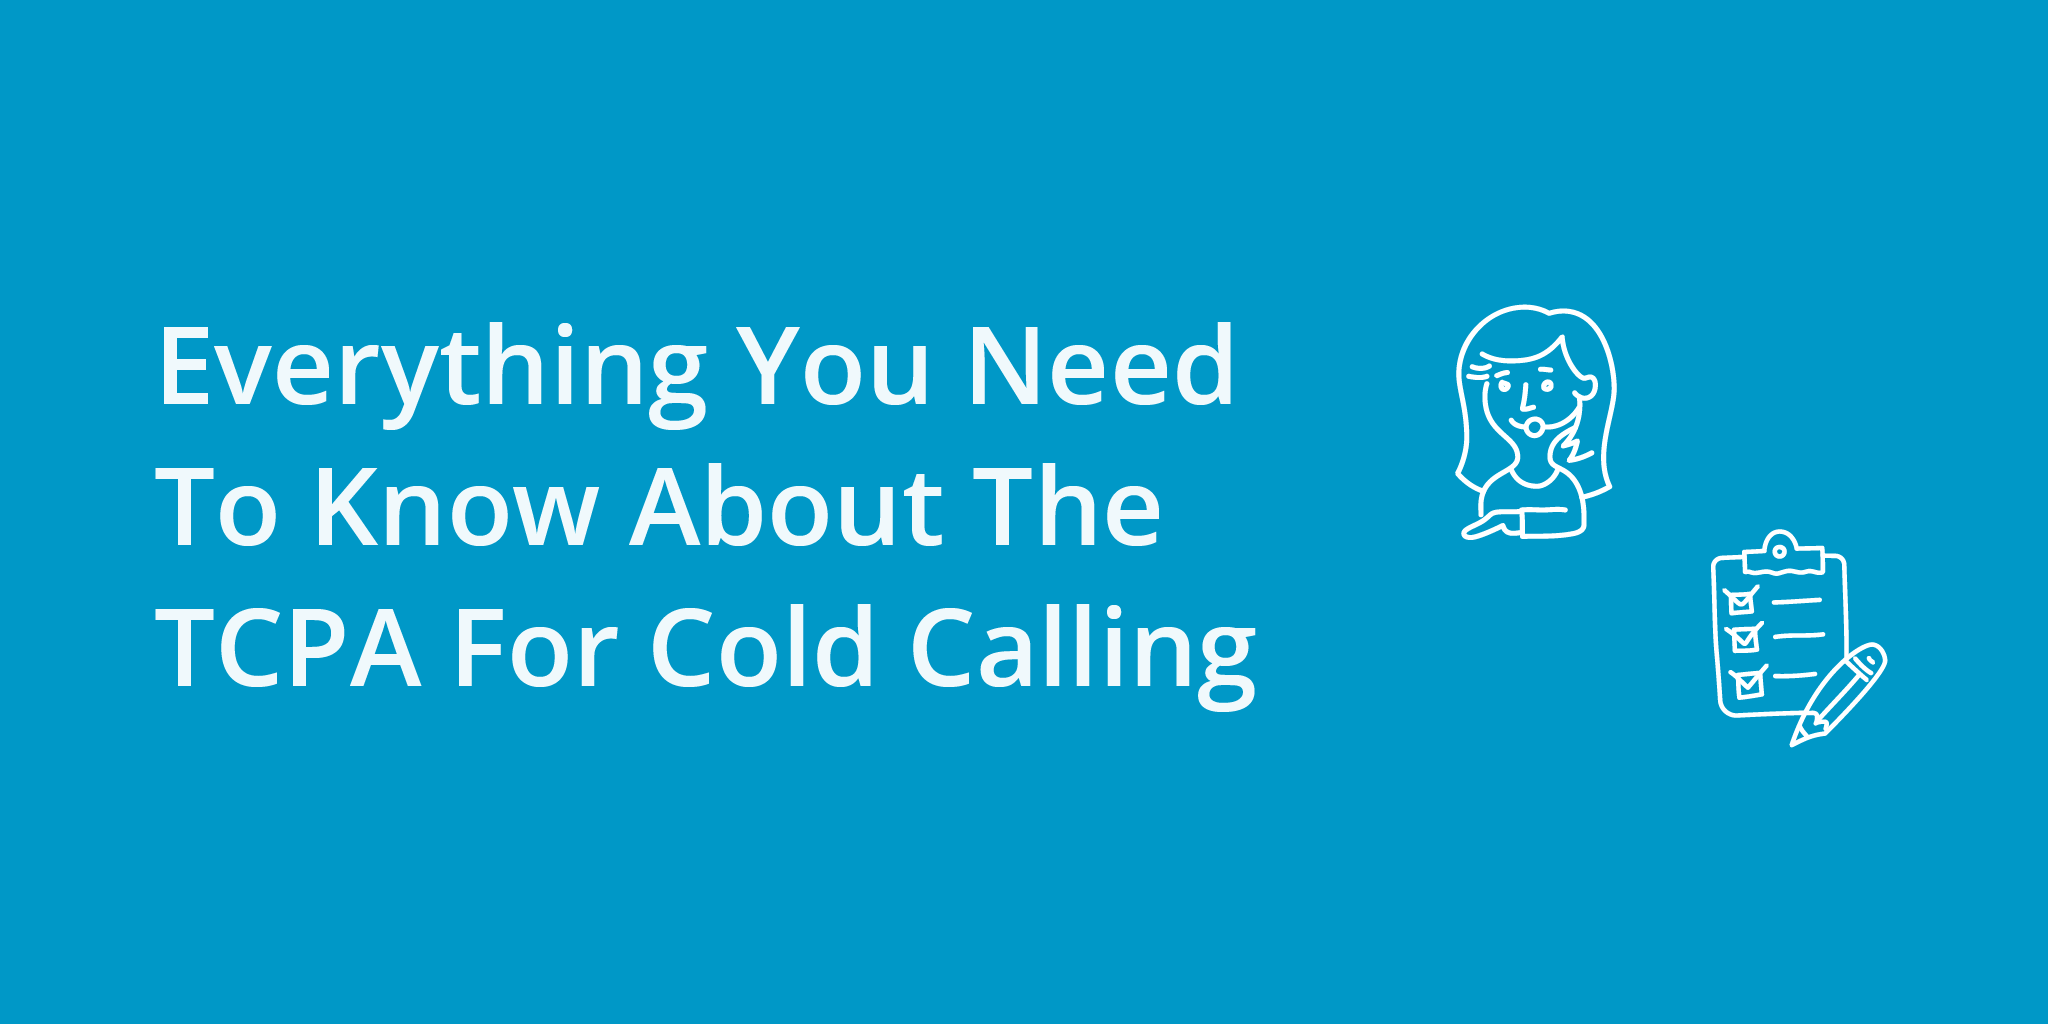 Everything You Need To Know About The TCPA For Cold Calling | Telephones for business